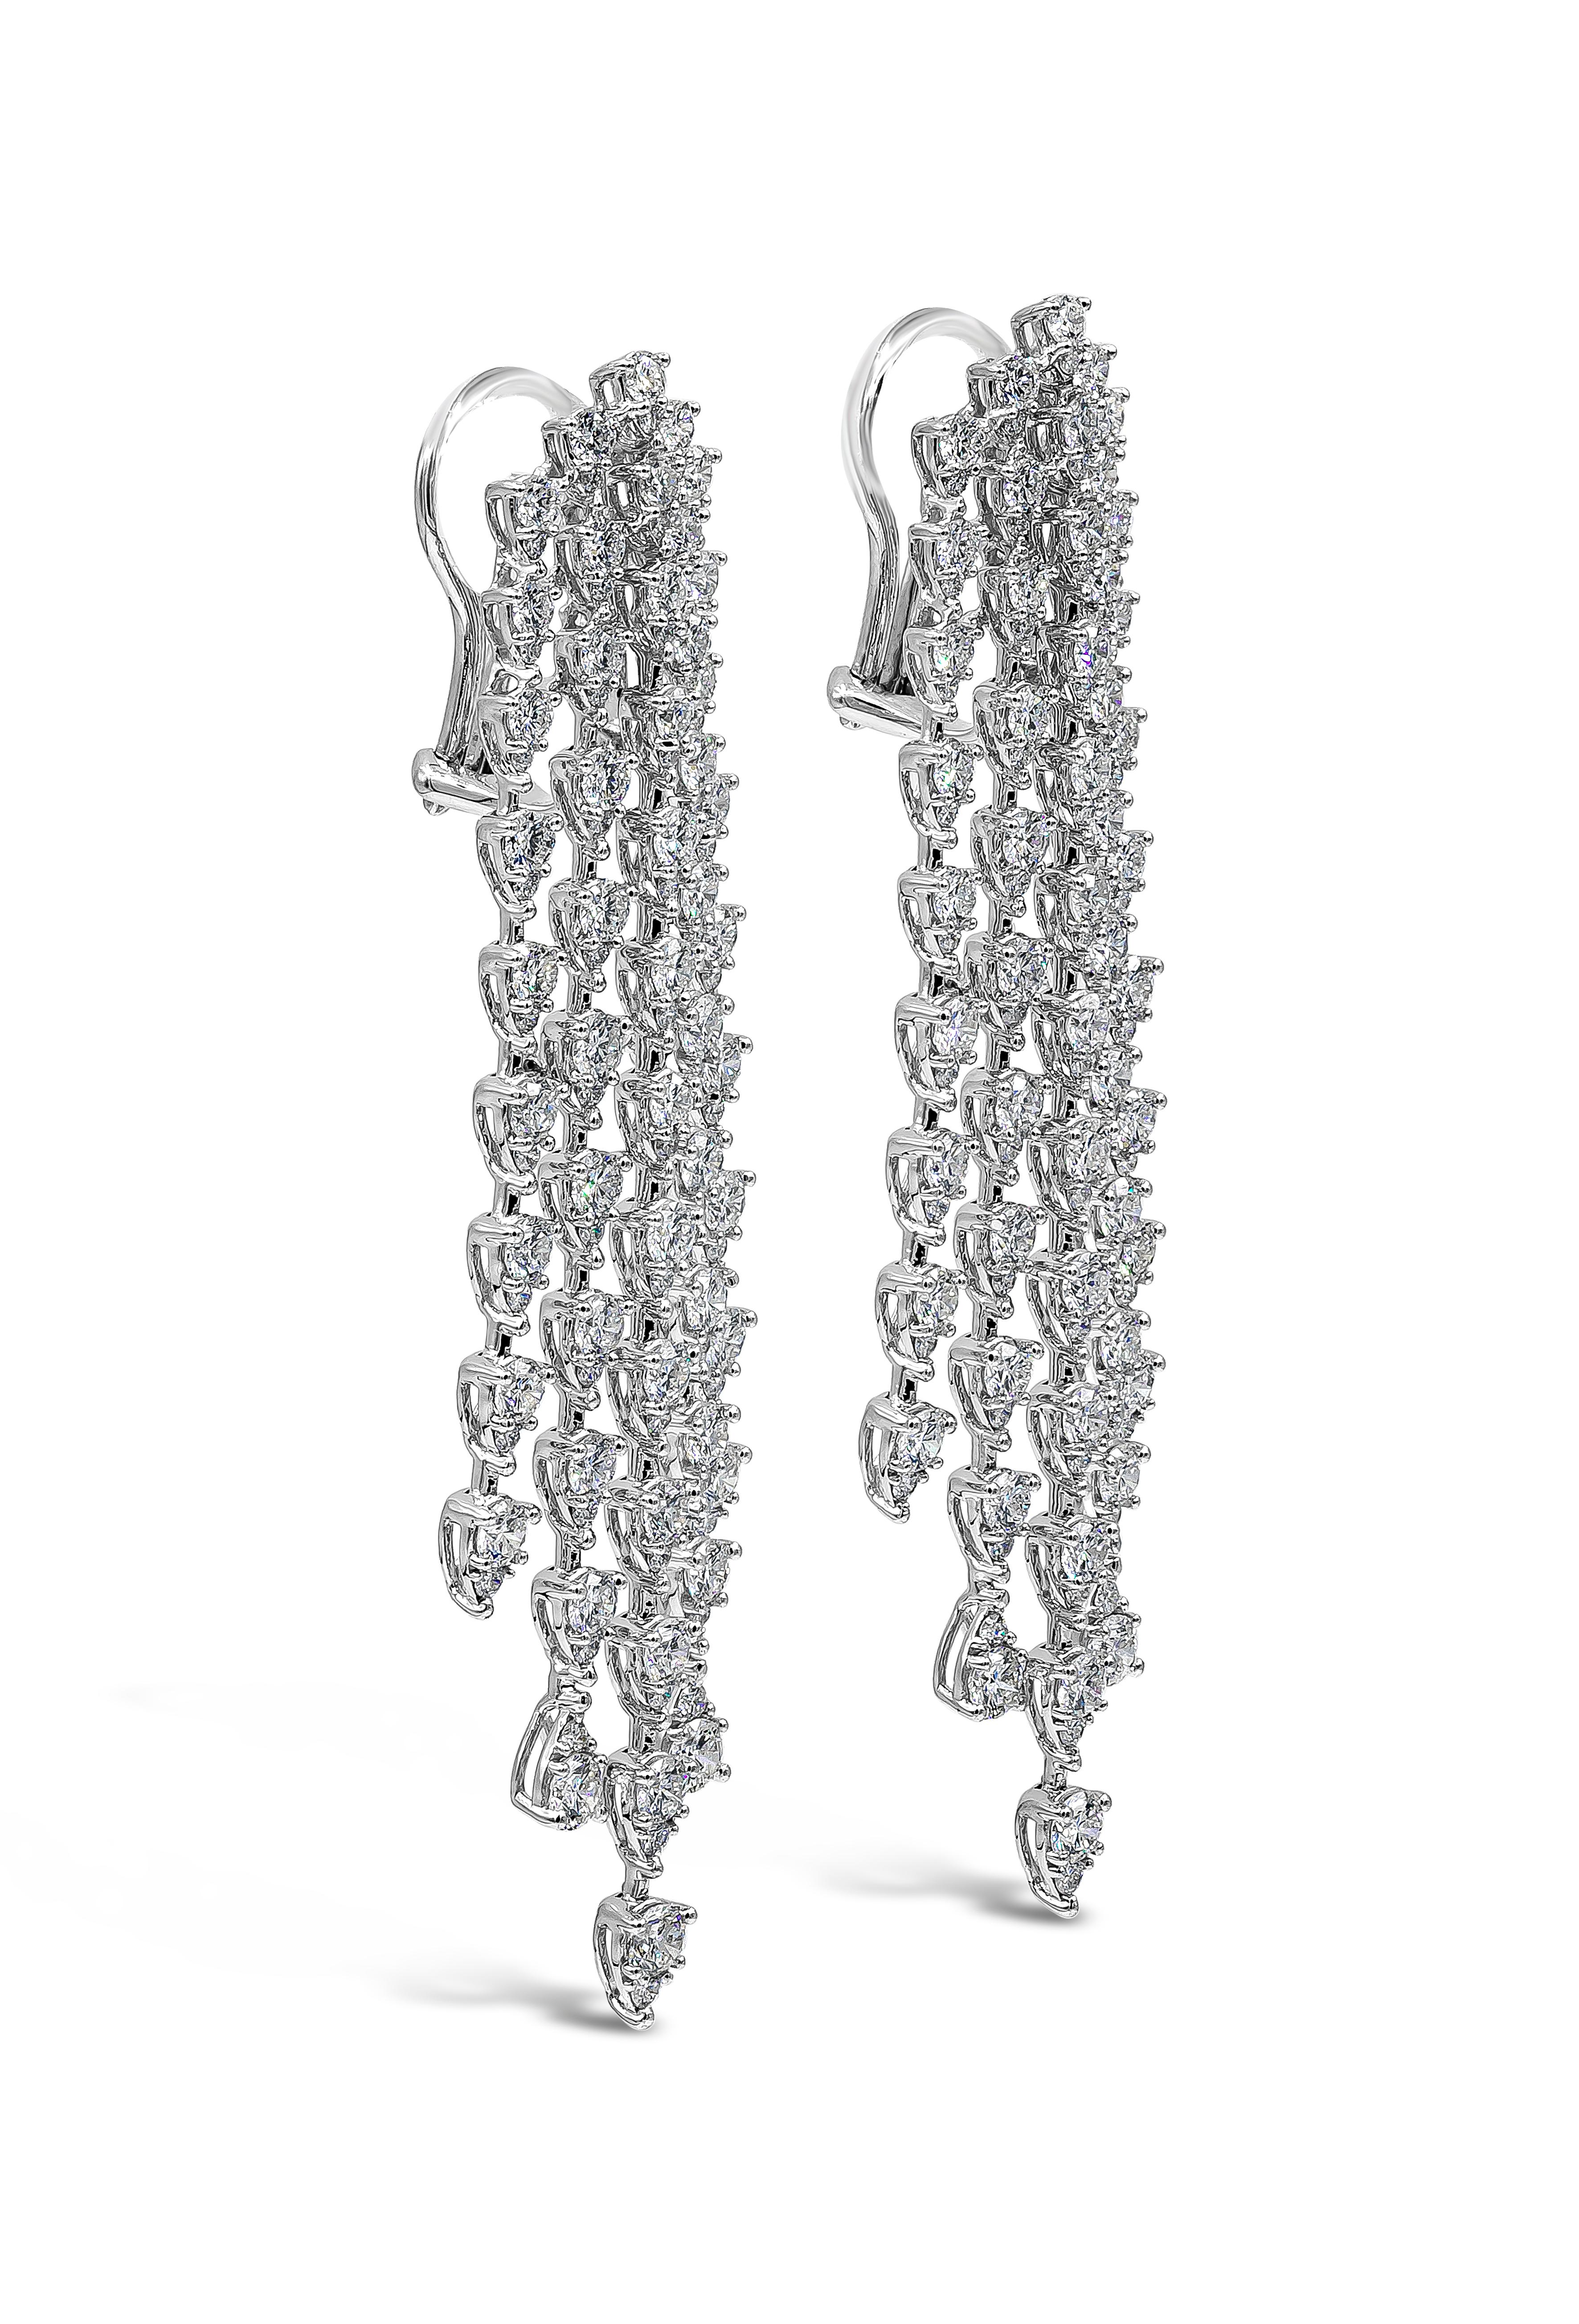 This versatile and stylish chandelier earrings showcasing five-rows of round brilliant pear shape illusion diamonds set in an elegant chandelier waterfall design and made in 18k white gold. Diamonds weigh 9.35 carats total and are approximately F-G